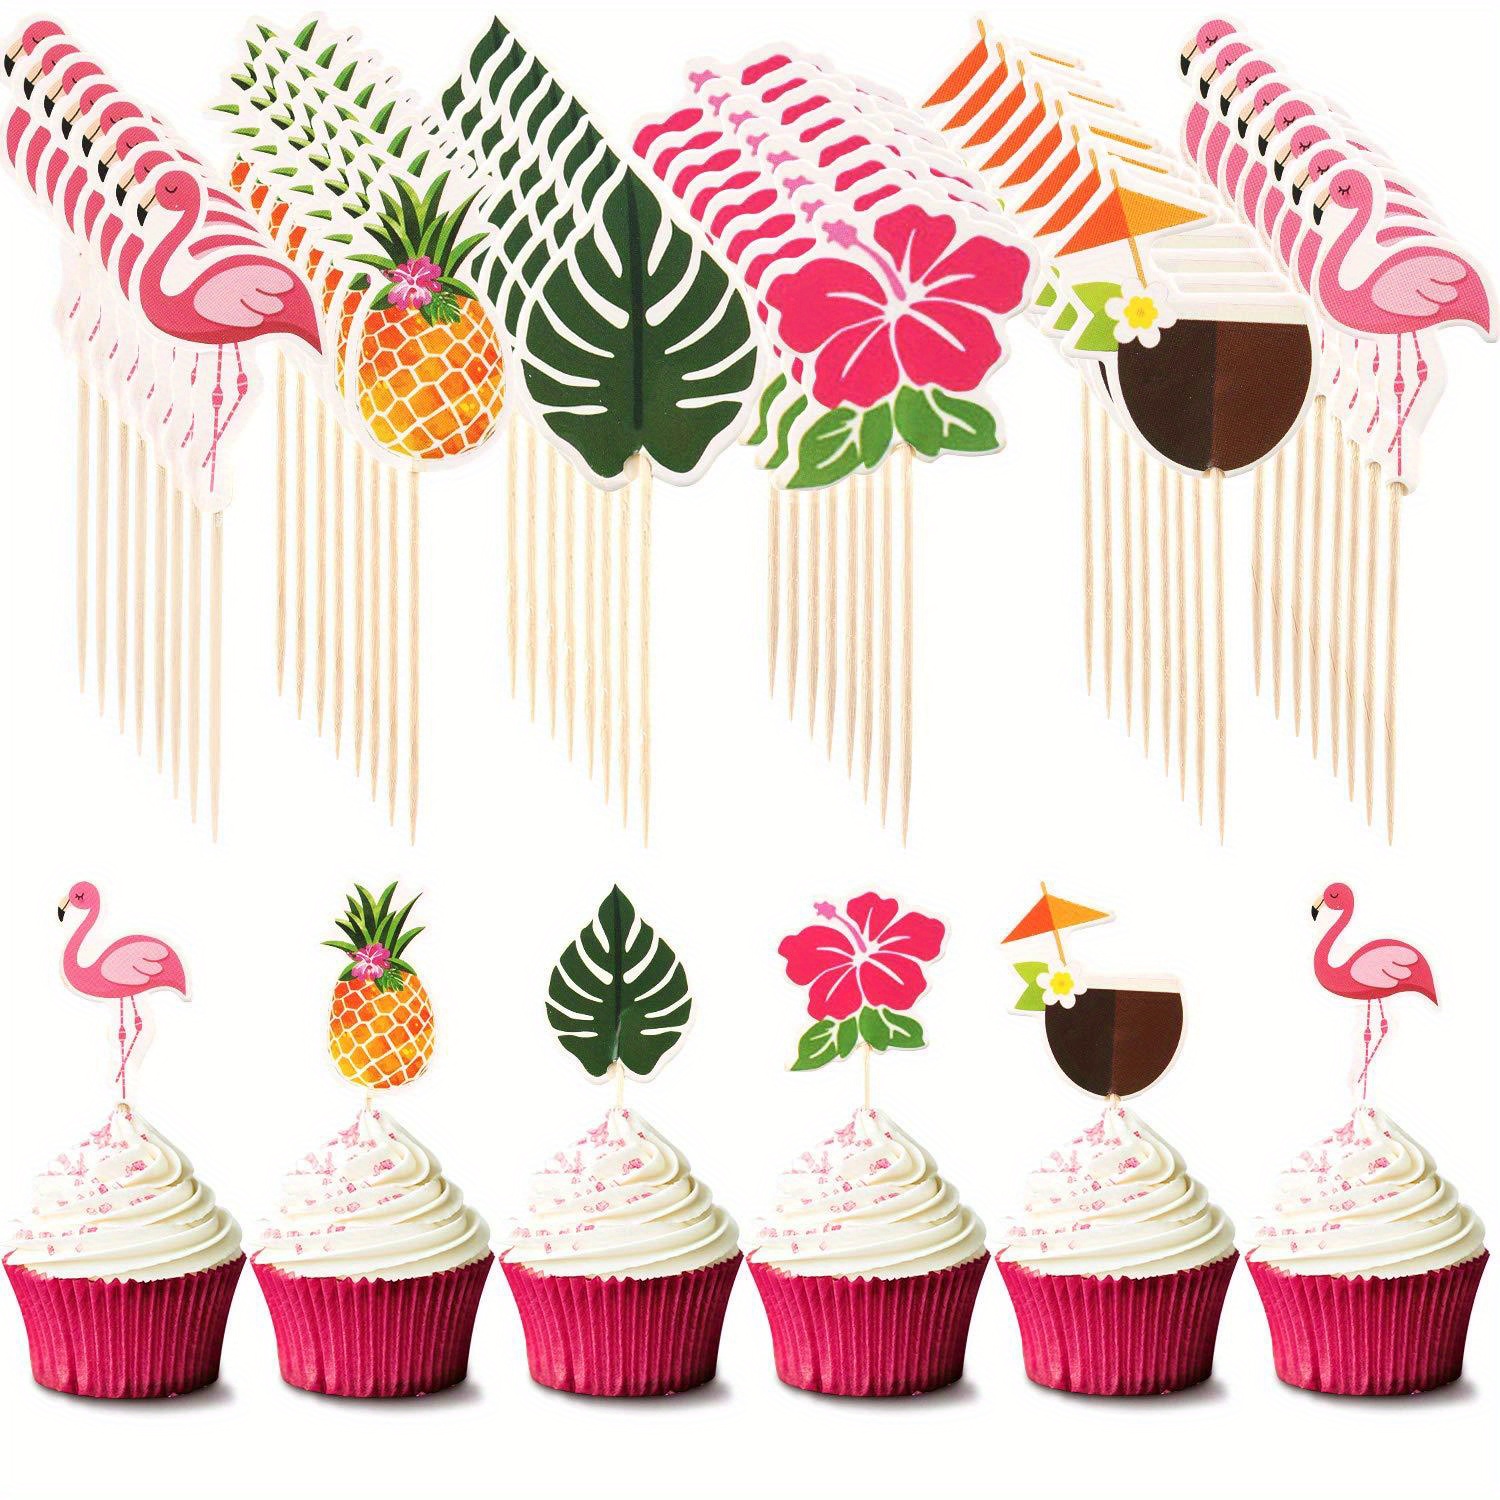 

24pcs, Cupcake Toppers Tropical Cake Decorations Hawaiian Toothpicks Sticks With Flamingo Pineapple Palm Leaves Shape Picks For Summer Beach Theme Party Favors Supplies